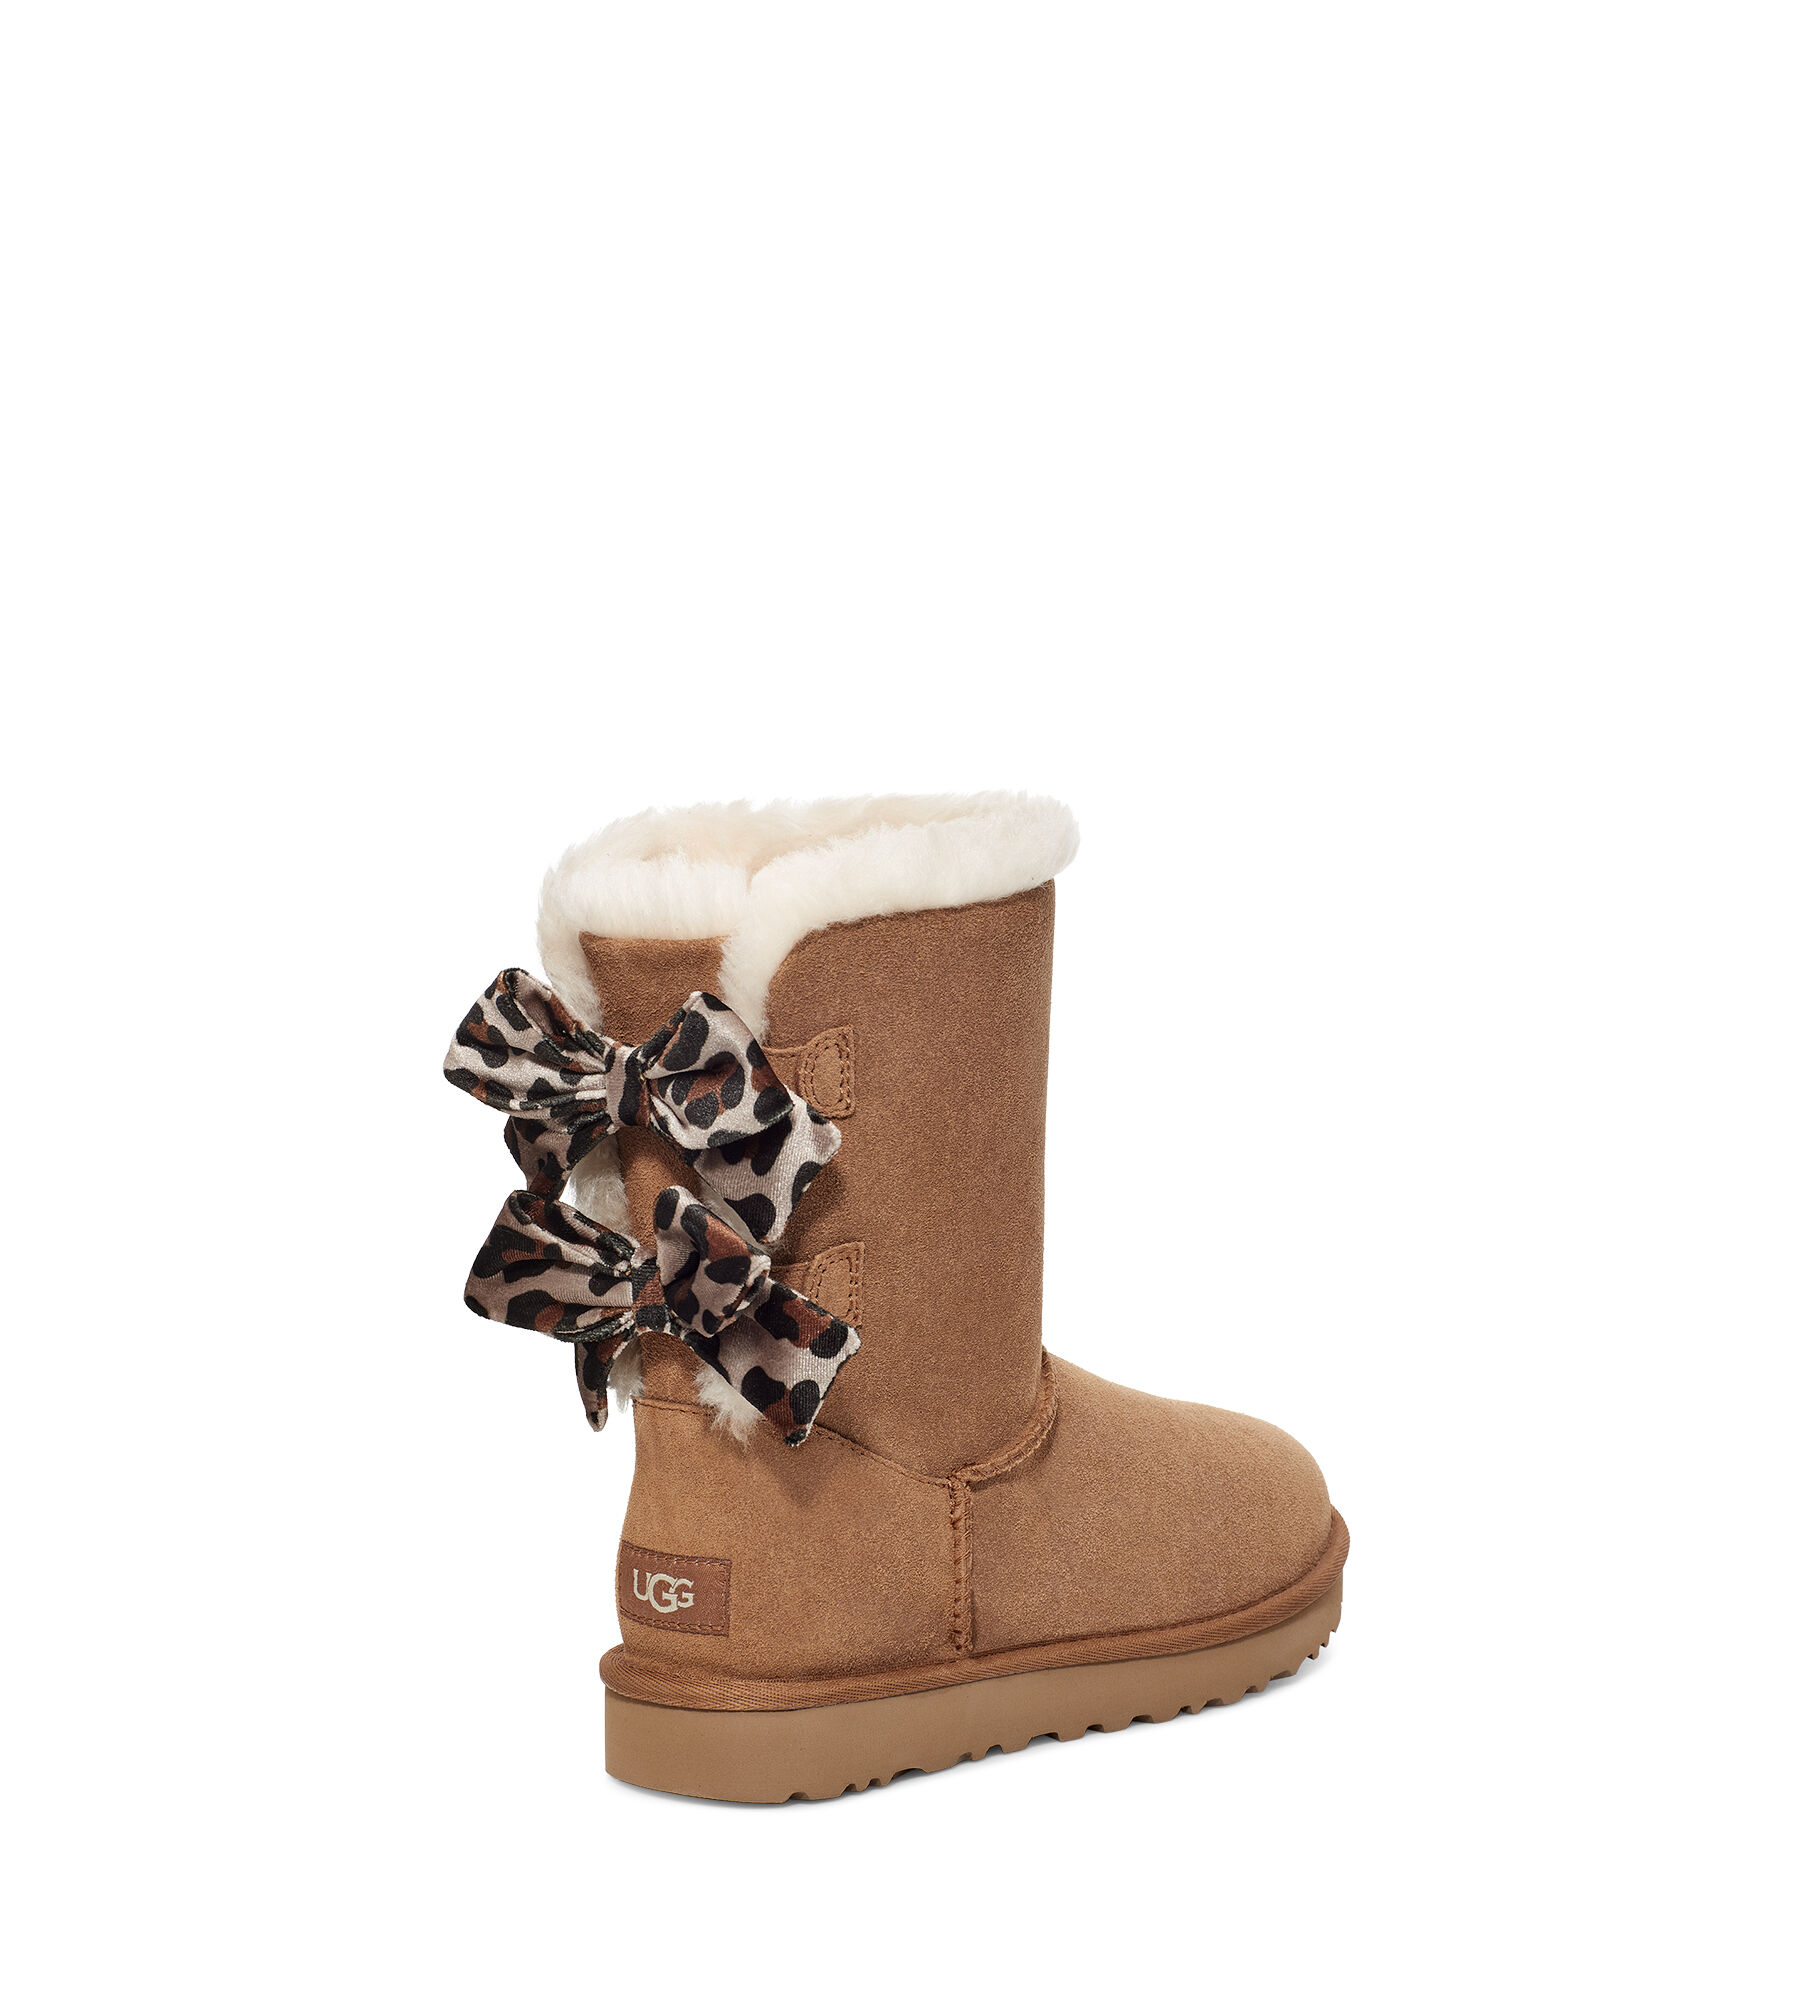 official ugg boots sale uk